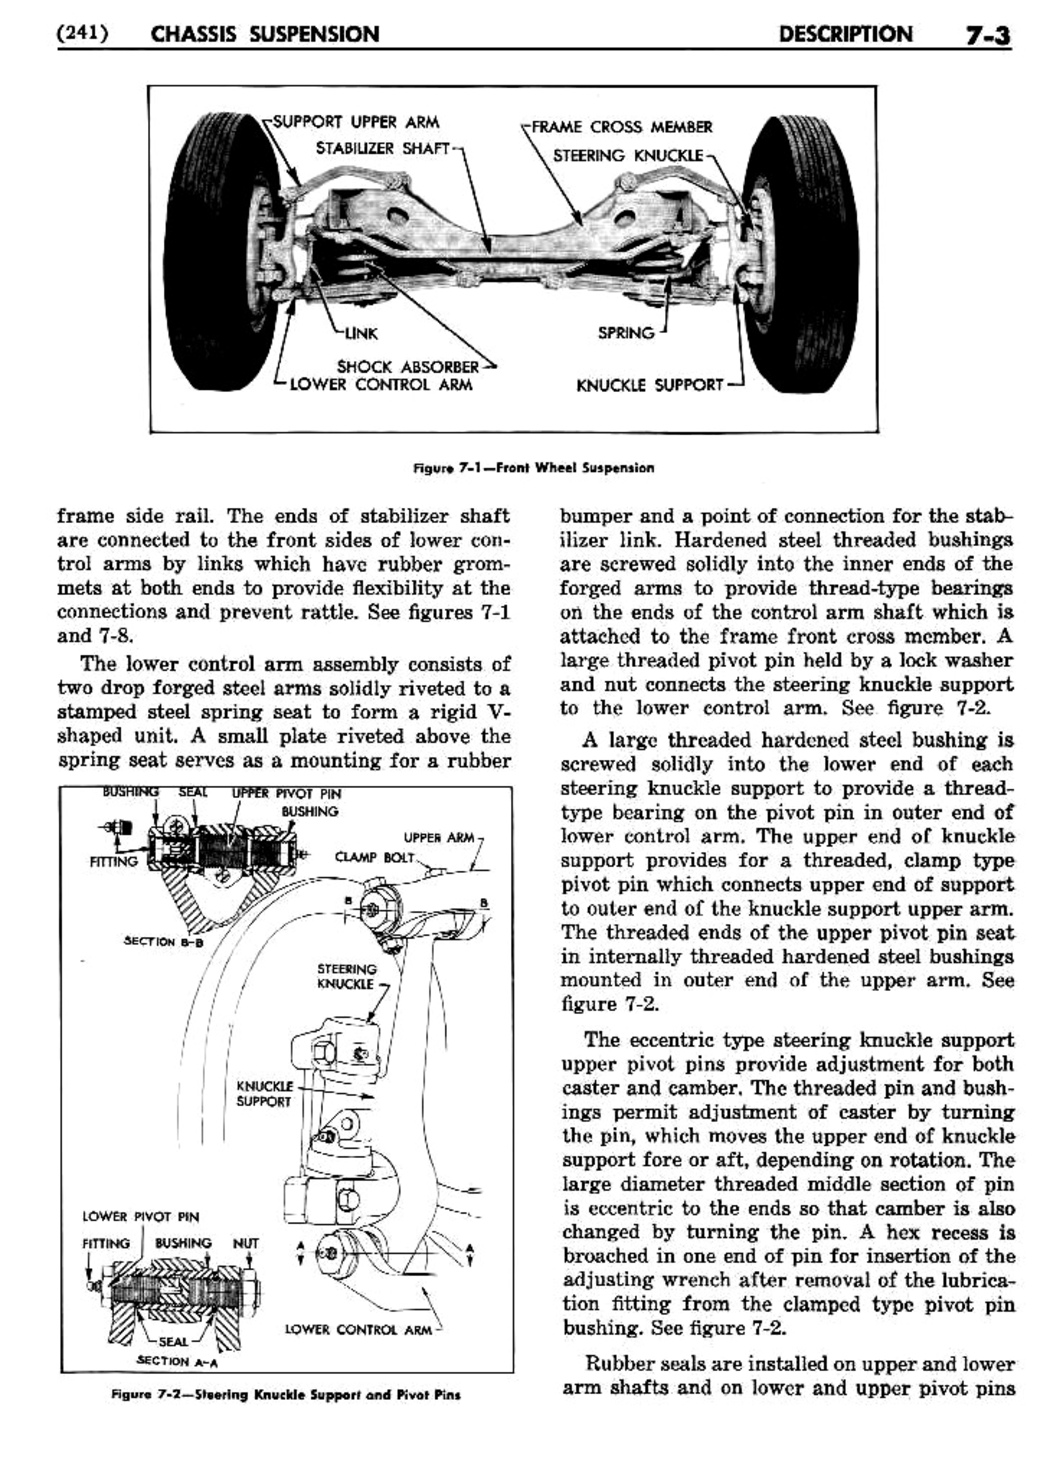 n_08 1956 Buick Shop Manual - Chassis Suspension-003-003.jpg